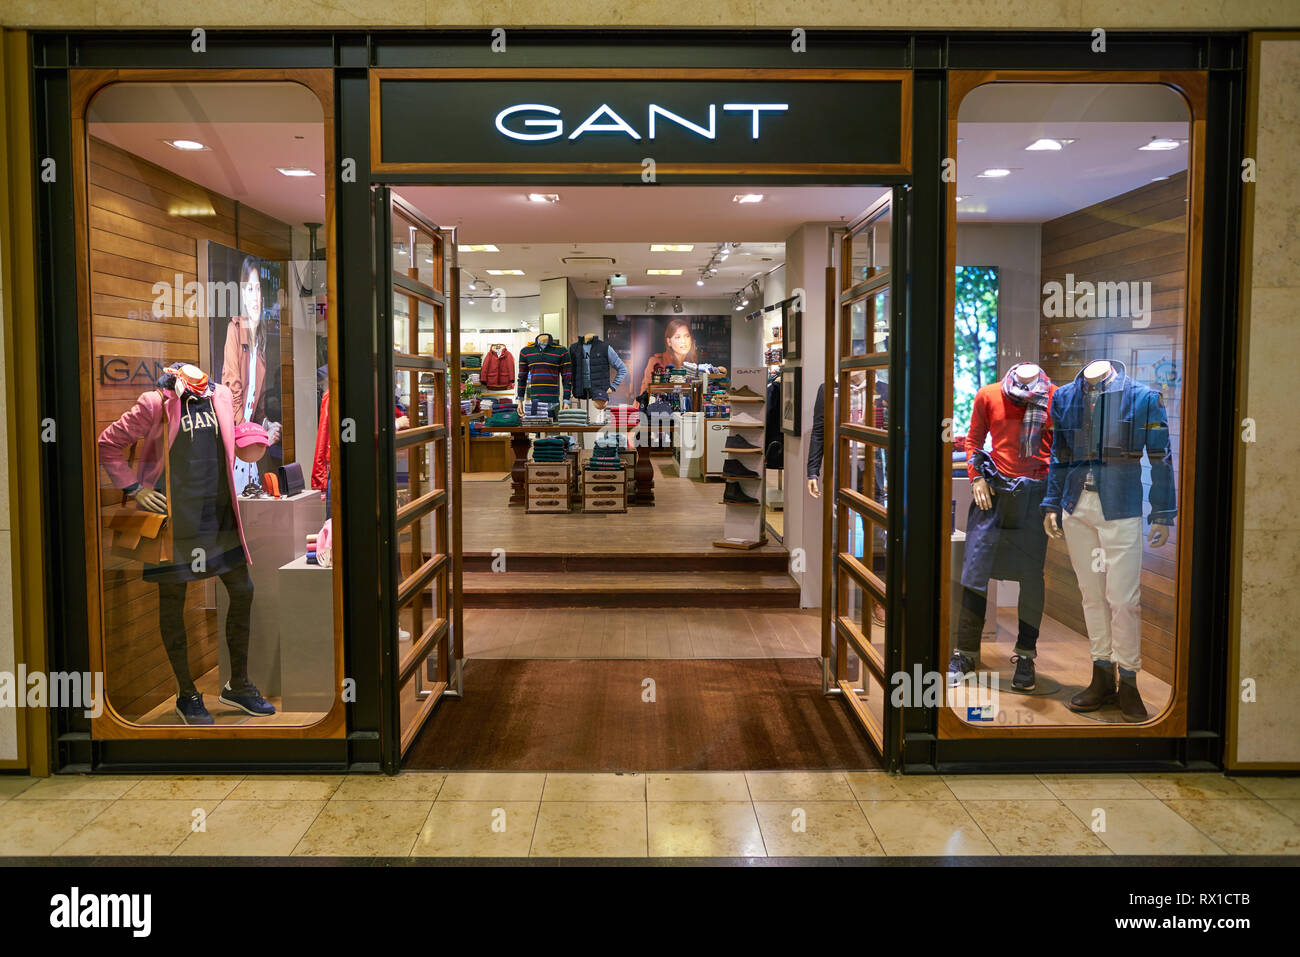 Gant Clothes High Resolution Stock Photography and Images - Alamy